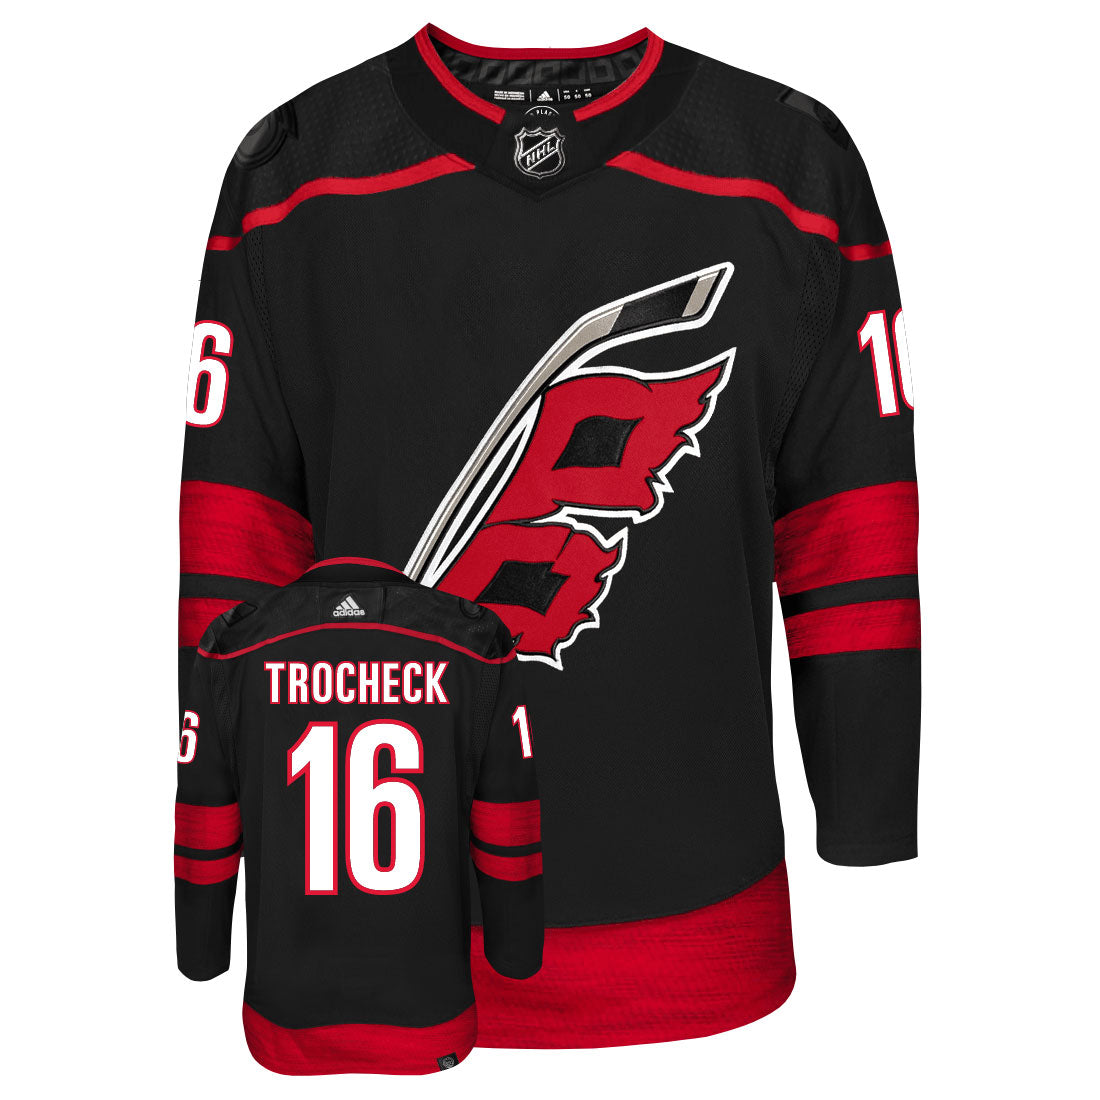 Vincent Trocheck Carolina Hurricanes Adidas Primegreen Authentic Third Alternate NHL Hockey Jersey - Front/Back View